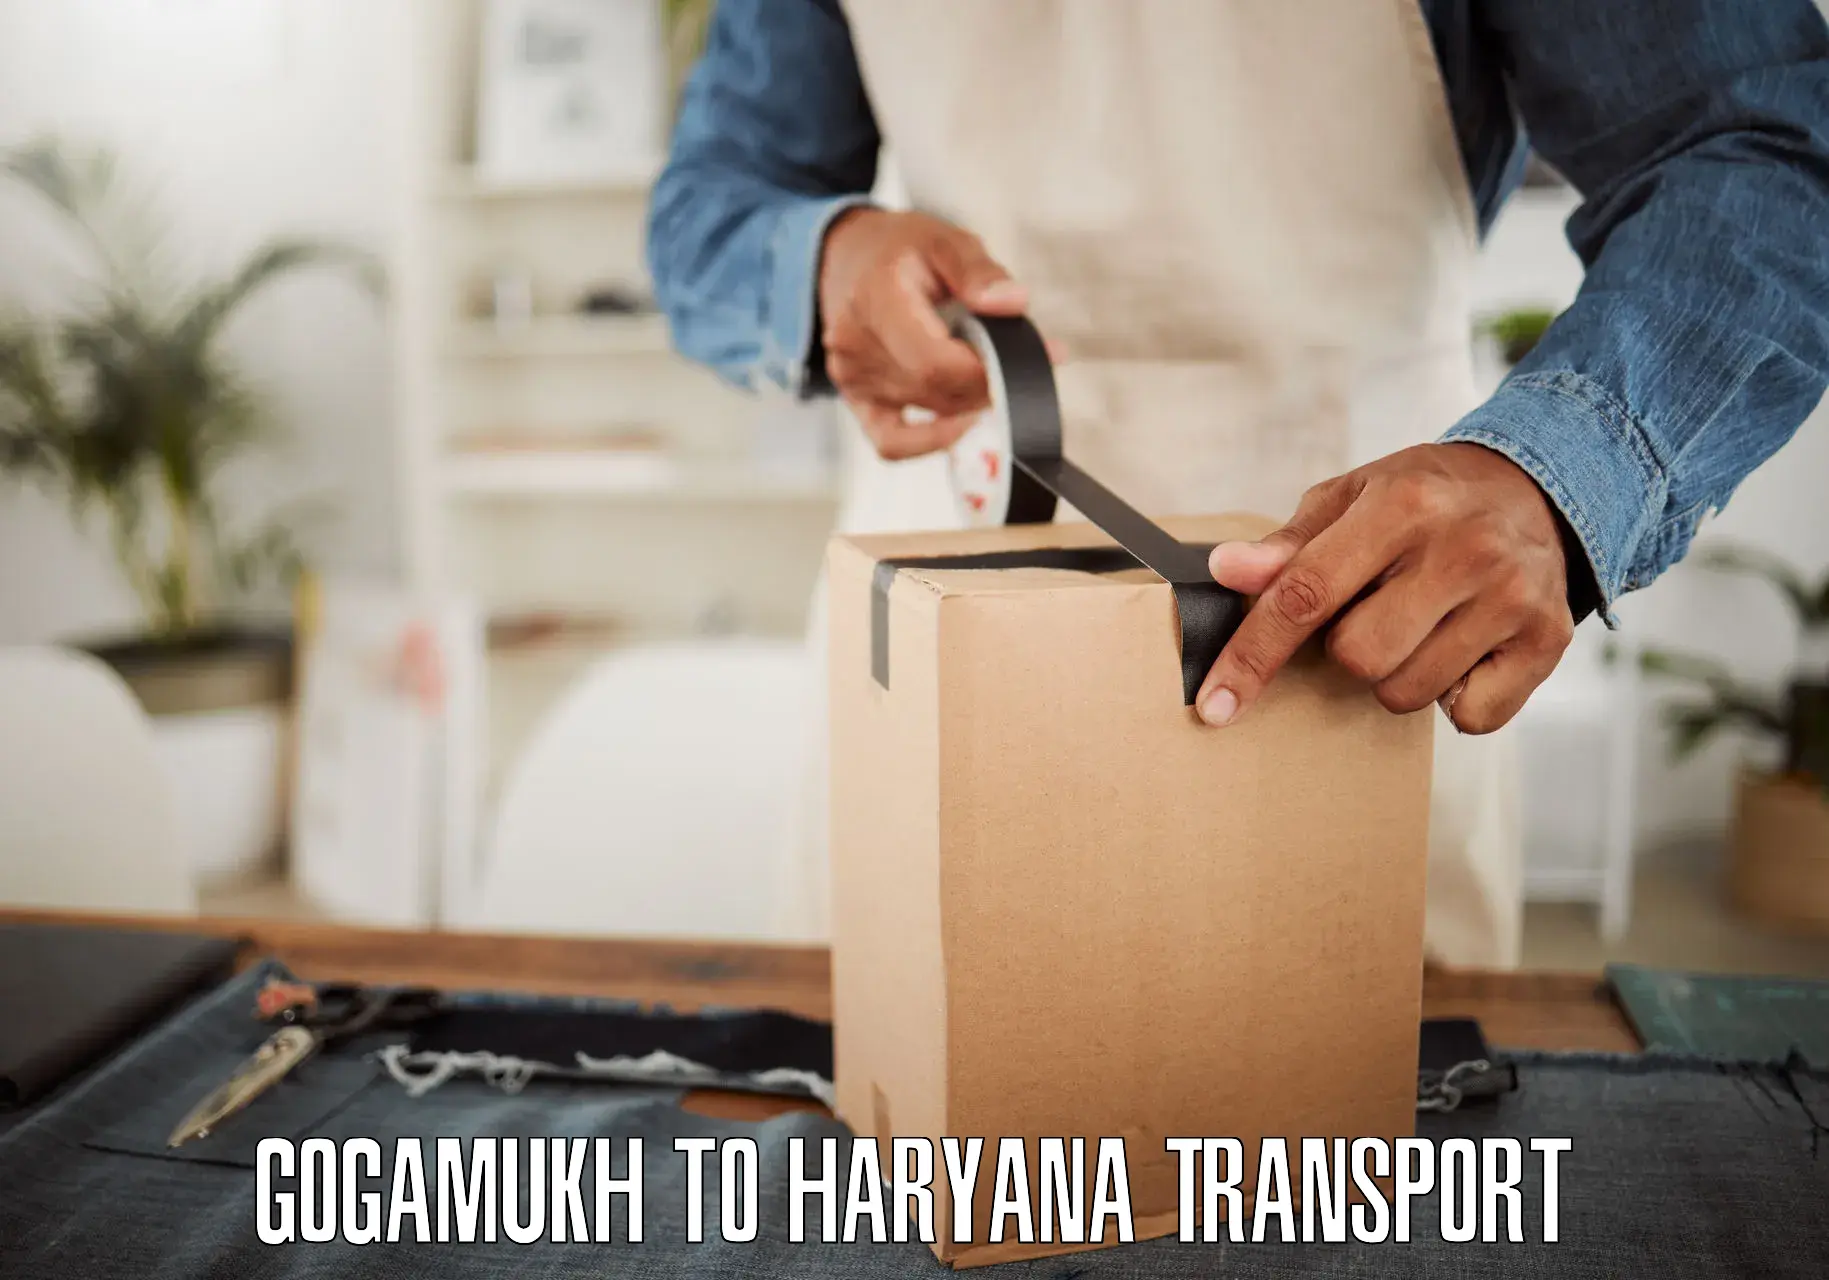 Container transport service Gogamukh to Chaudhary Charan Singh Haryana Agricultural University Hisar